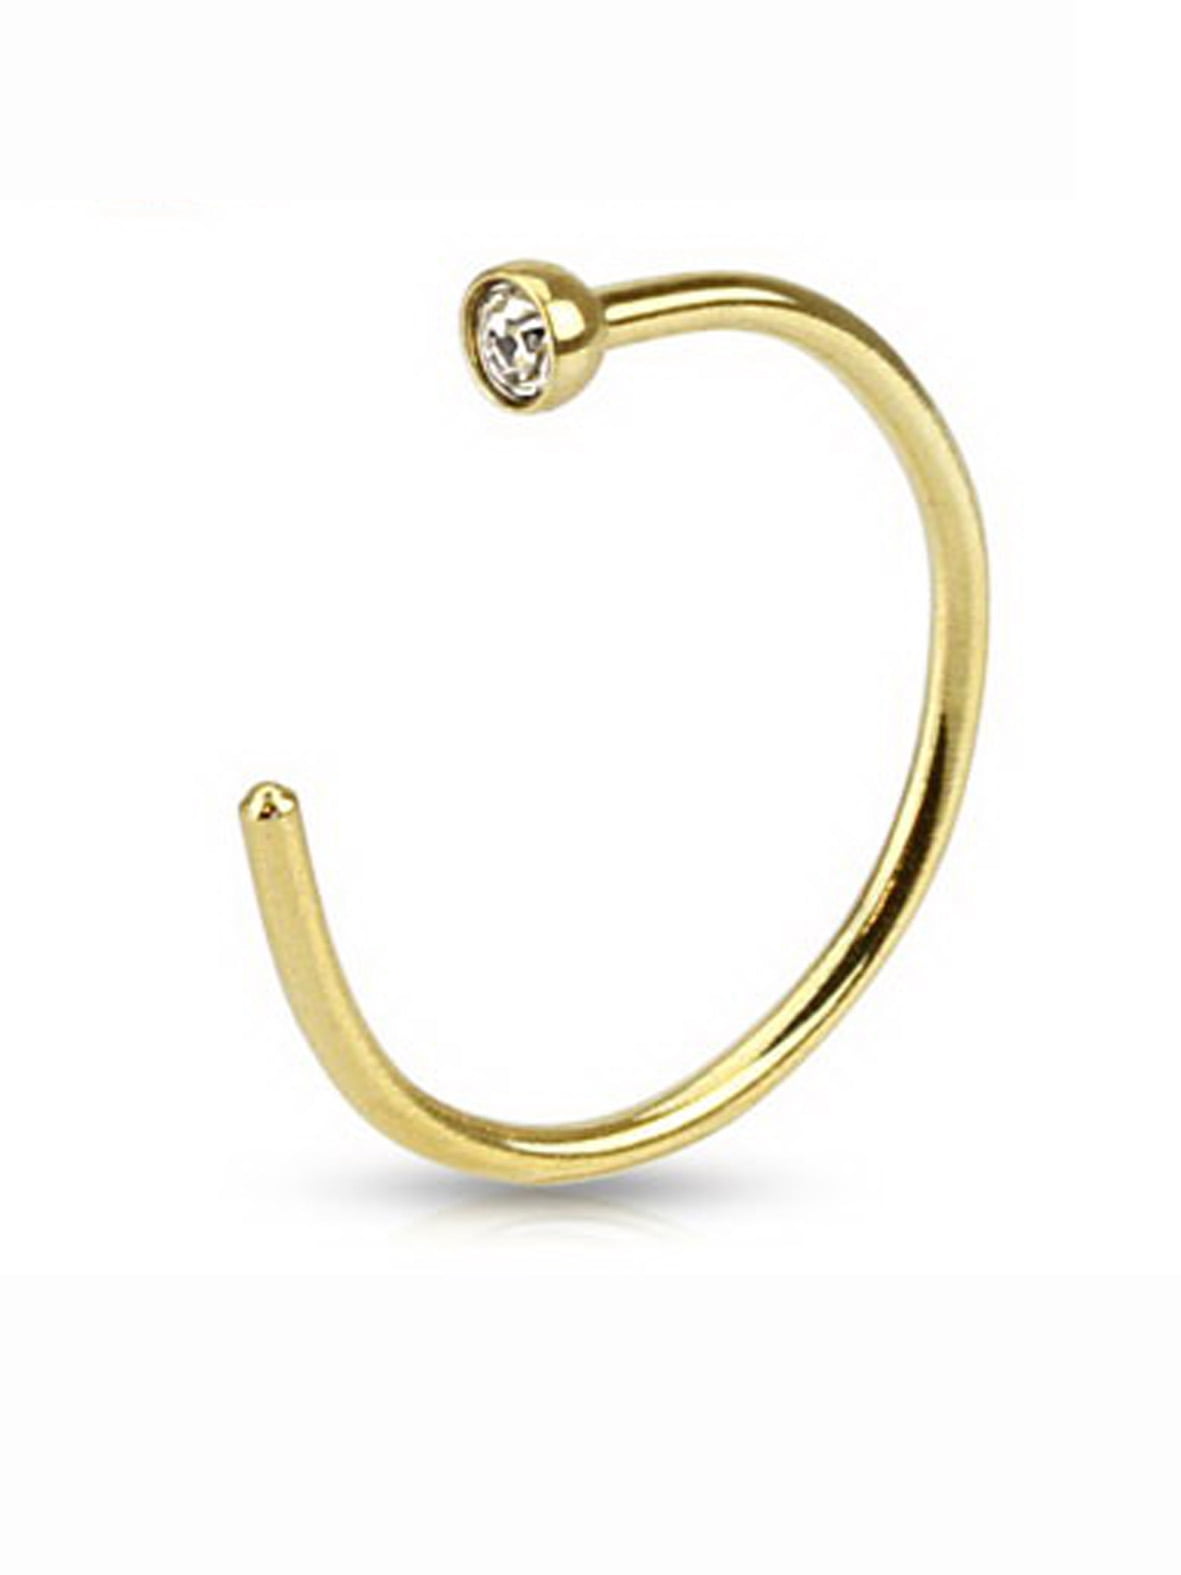 Golden Nose Ring Piercing With Clear Rhinestone (0.8 mm) - Walmart.com